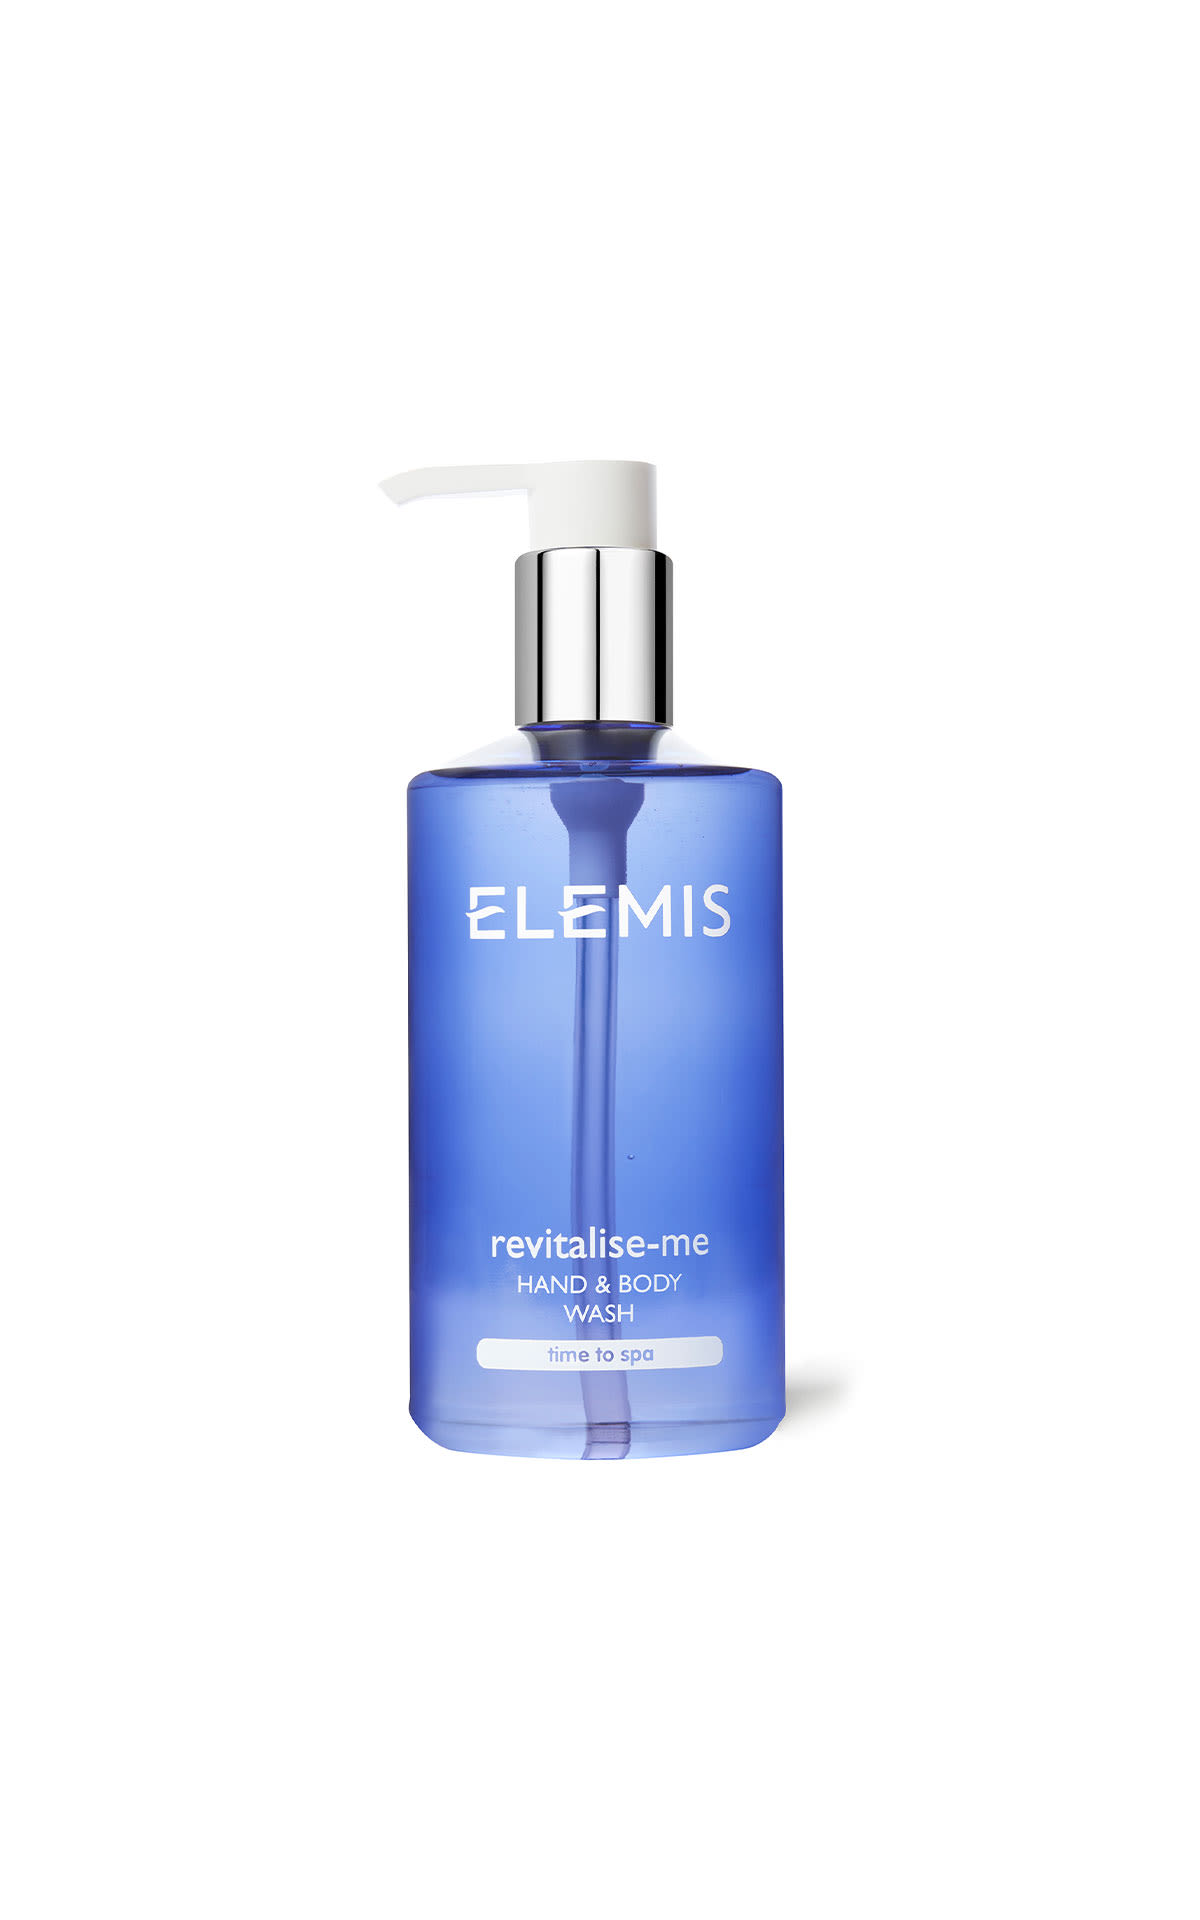 ELEMIS Revitalise me hand and body wash 300ml from Bicester Village